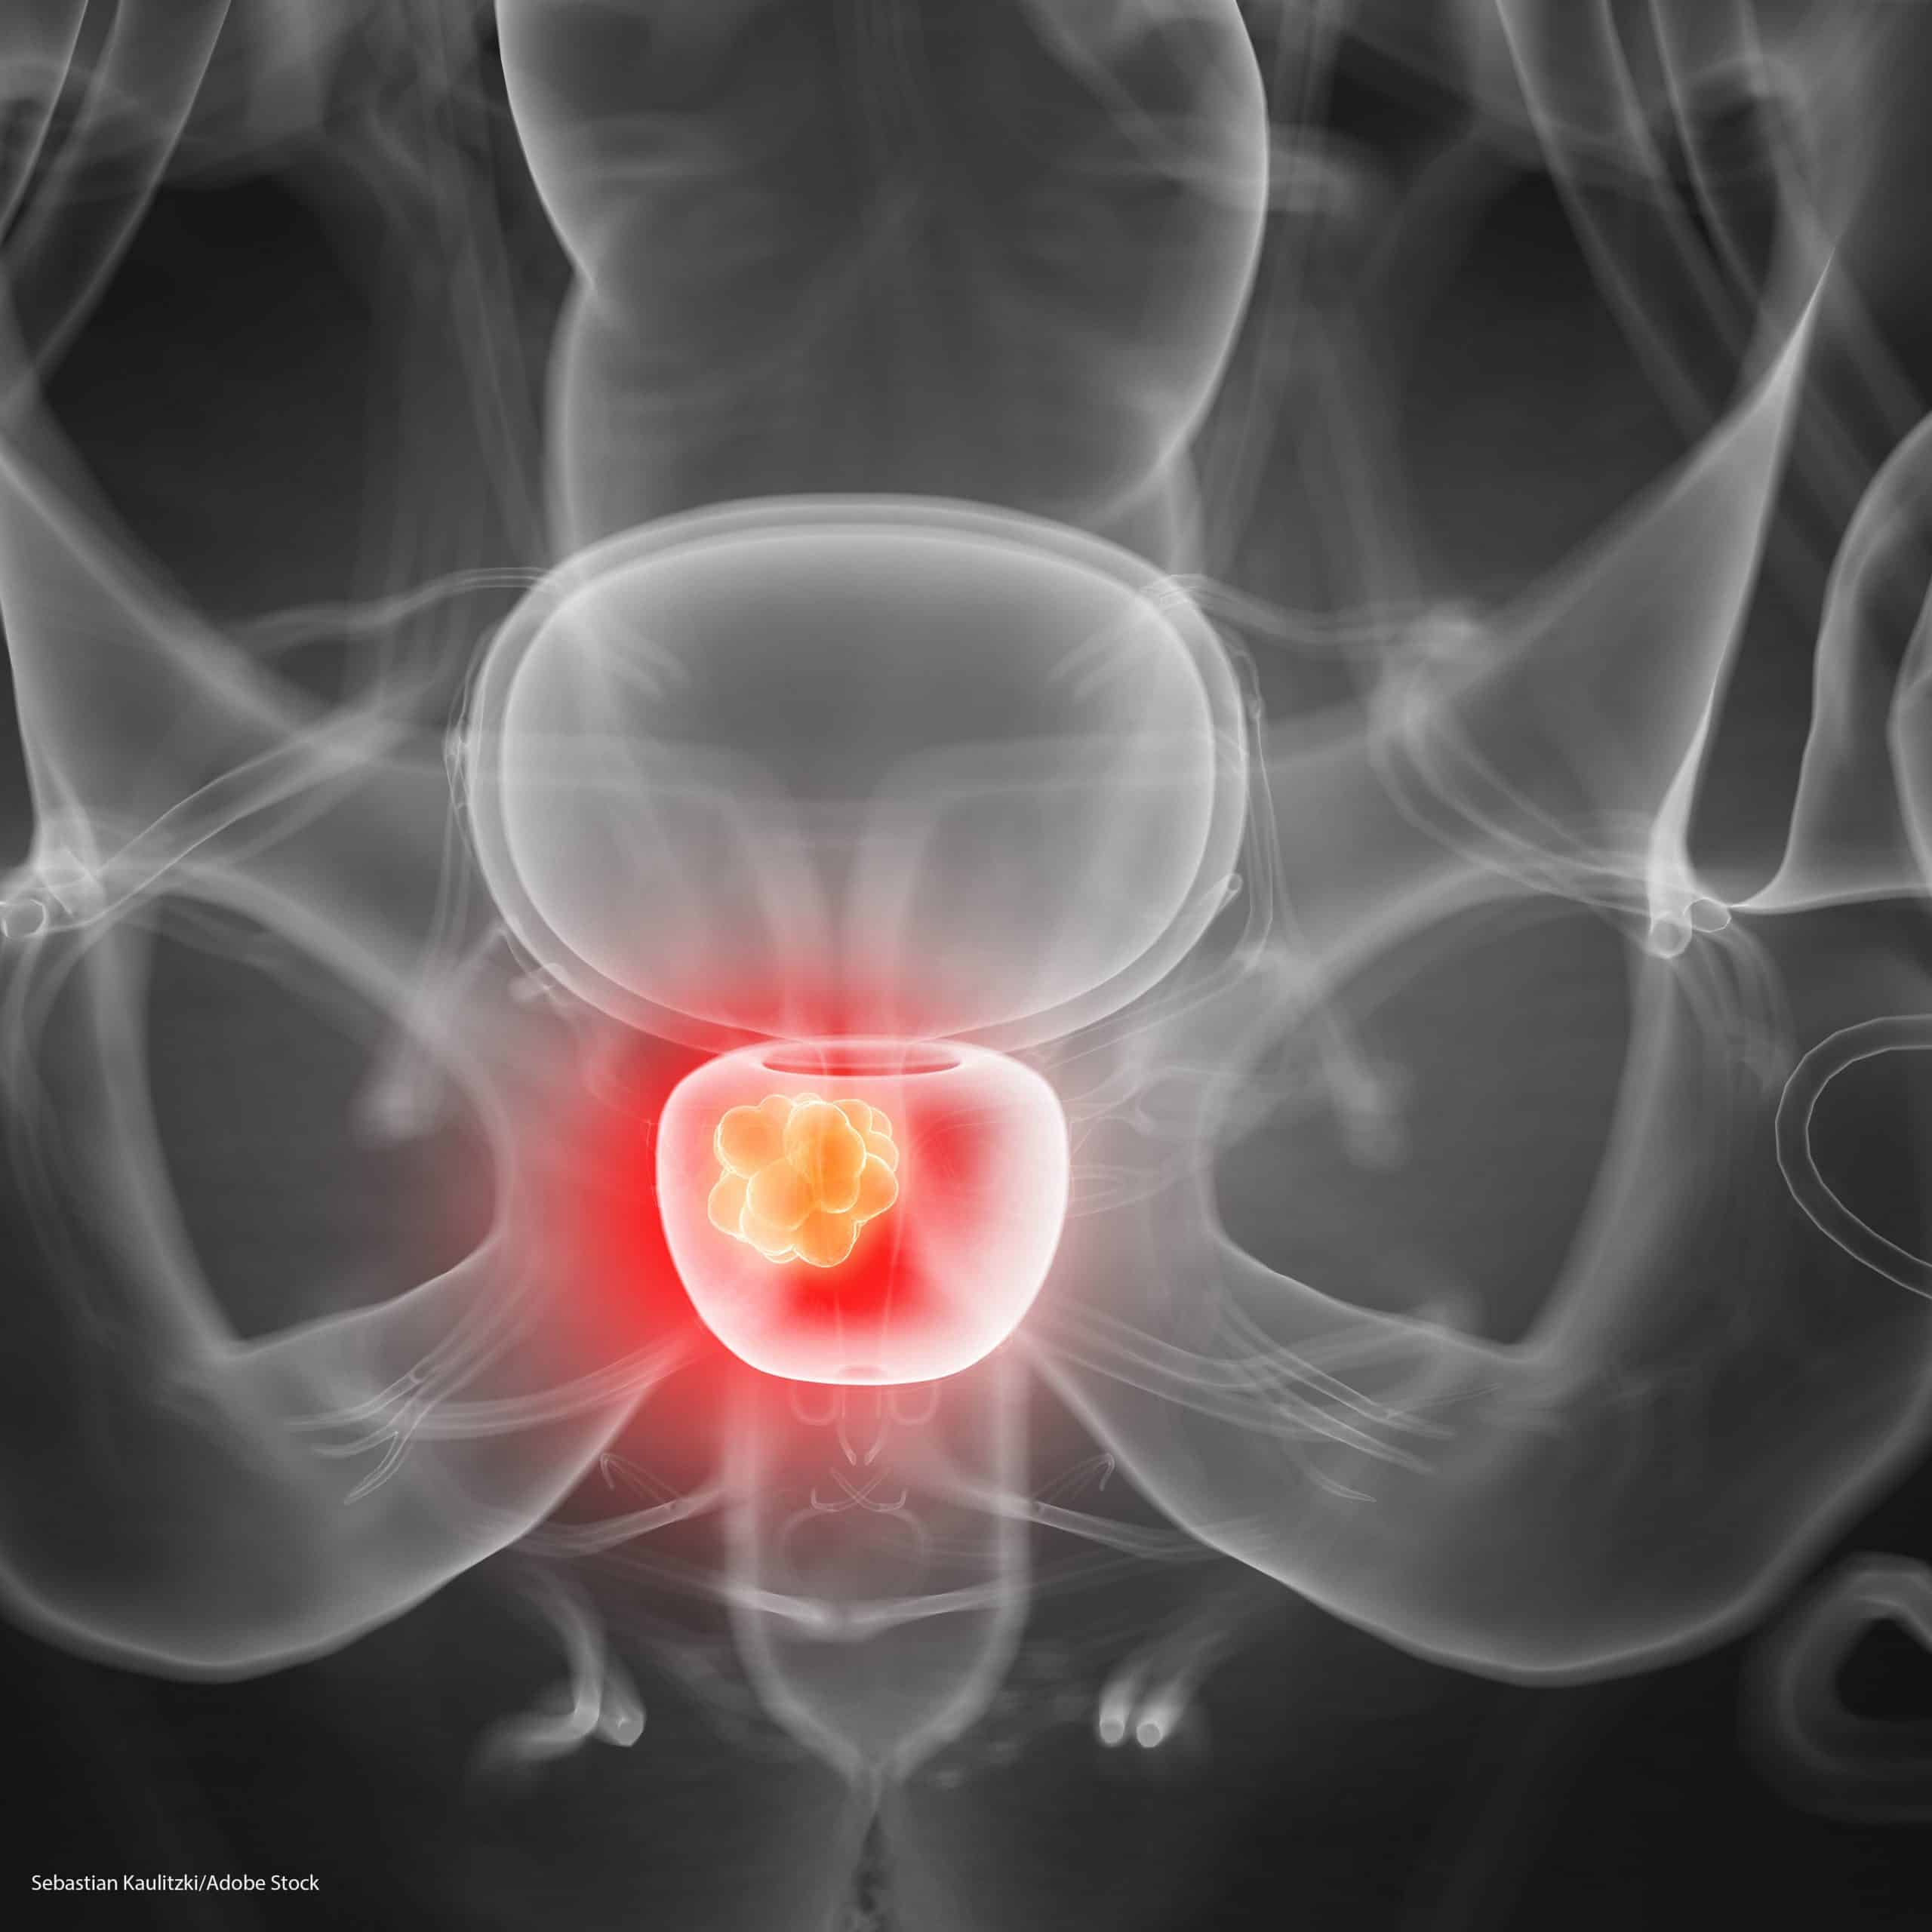 Bowel Problems After Radiotherapy For Prostate Cancer ...